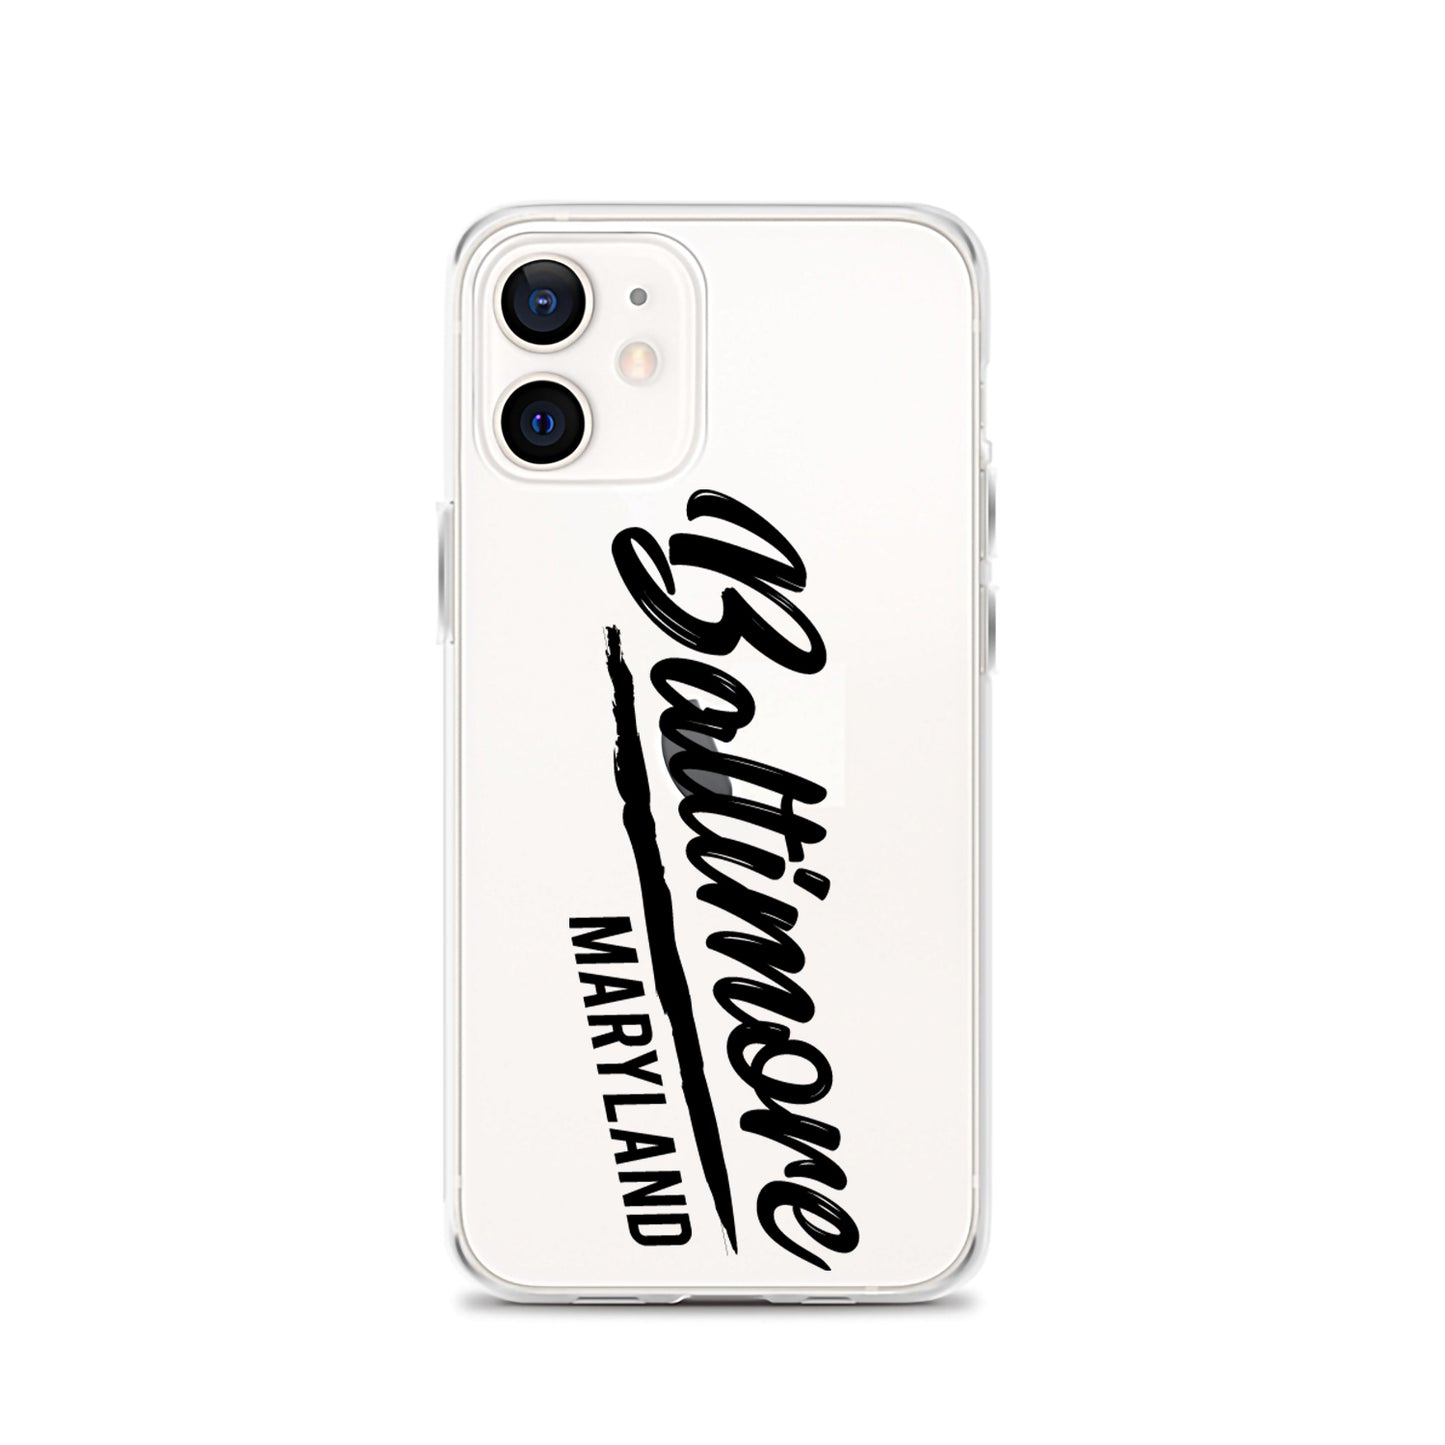 Baltimore iPhone Case, Clear Baltimore iPhone Case